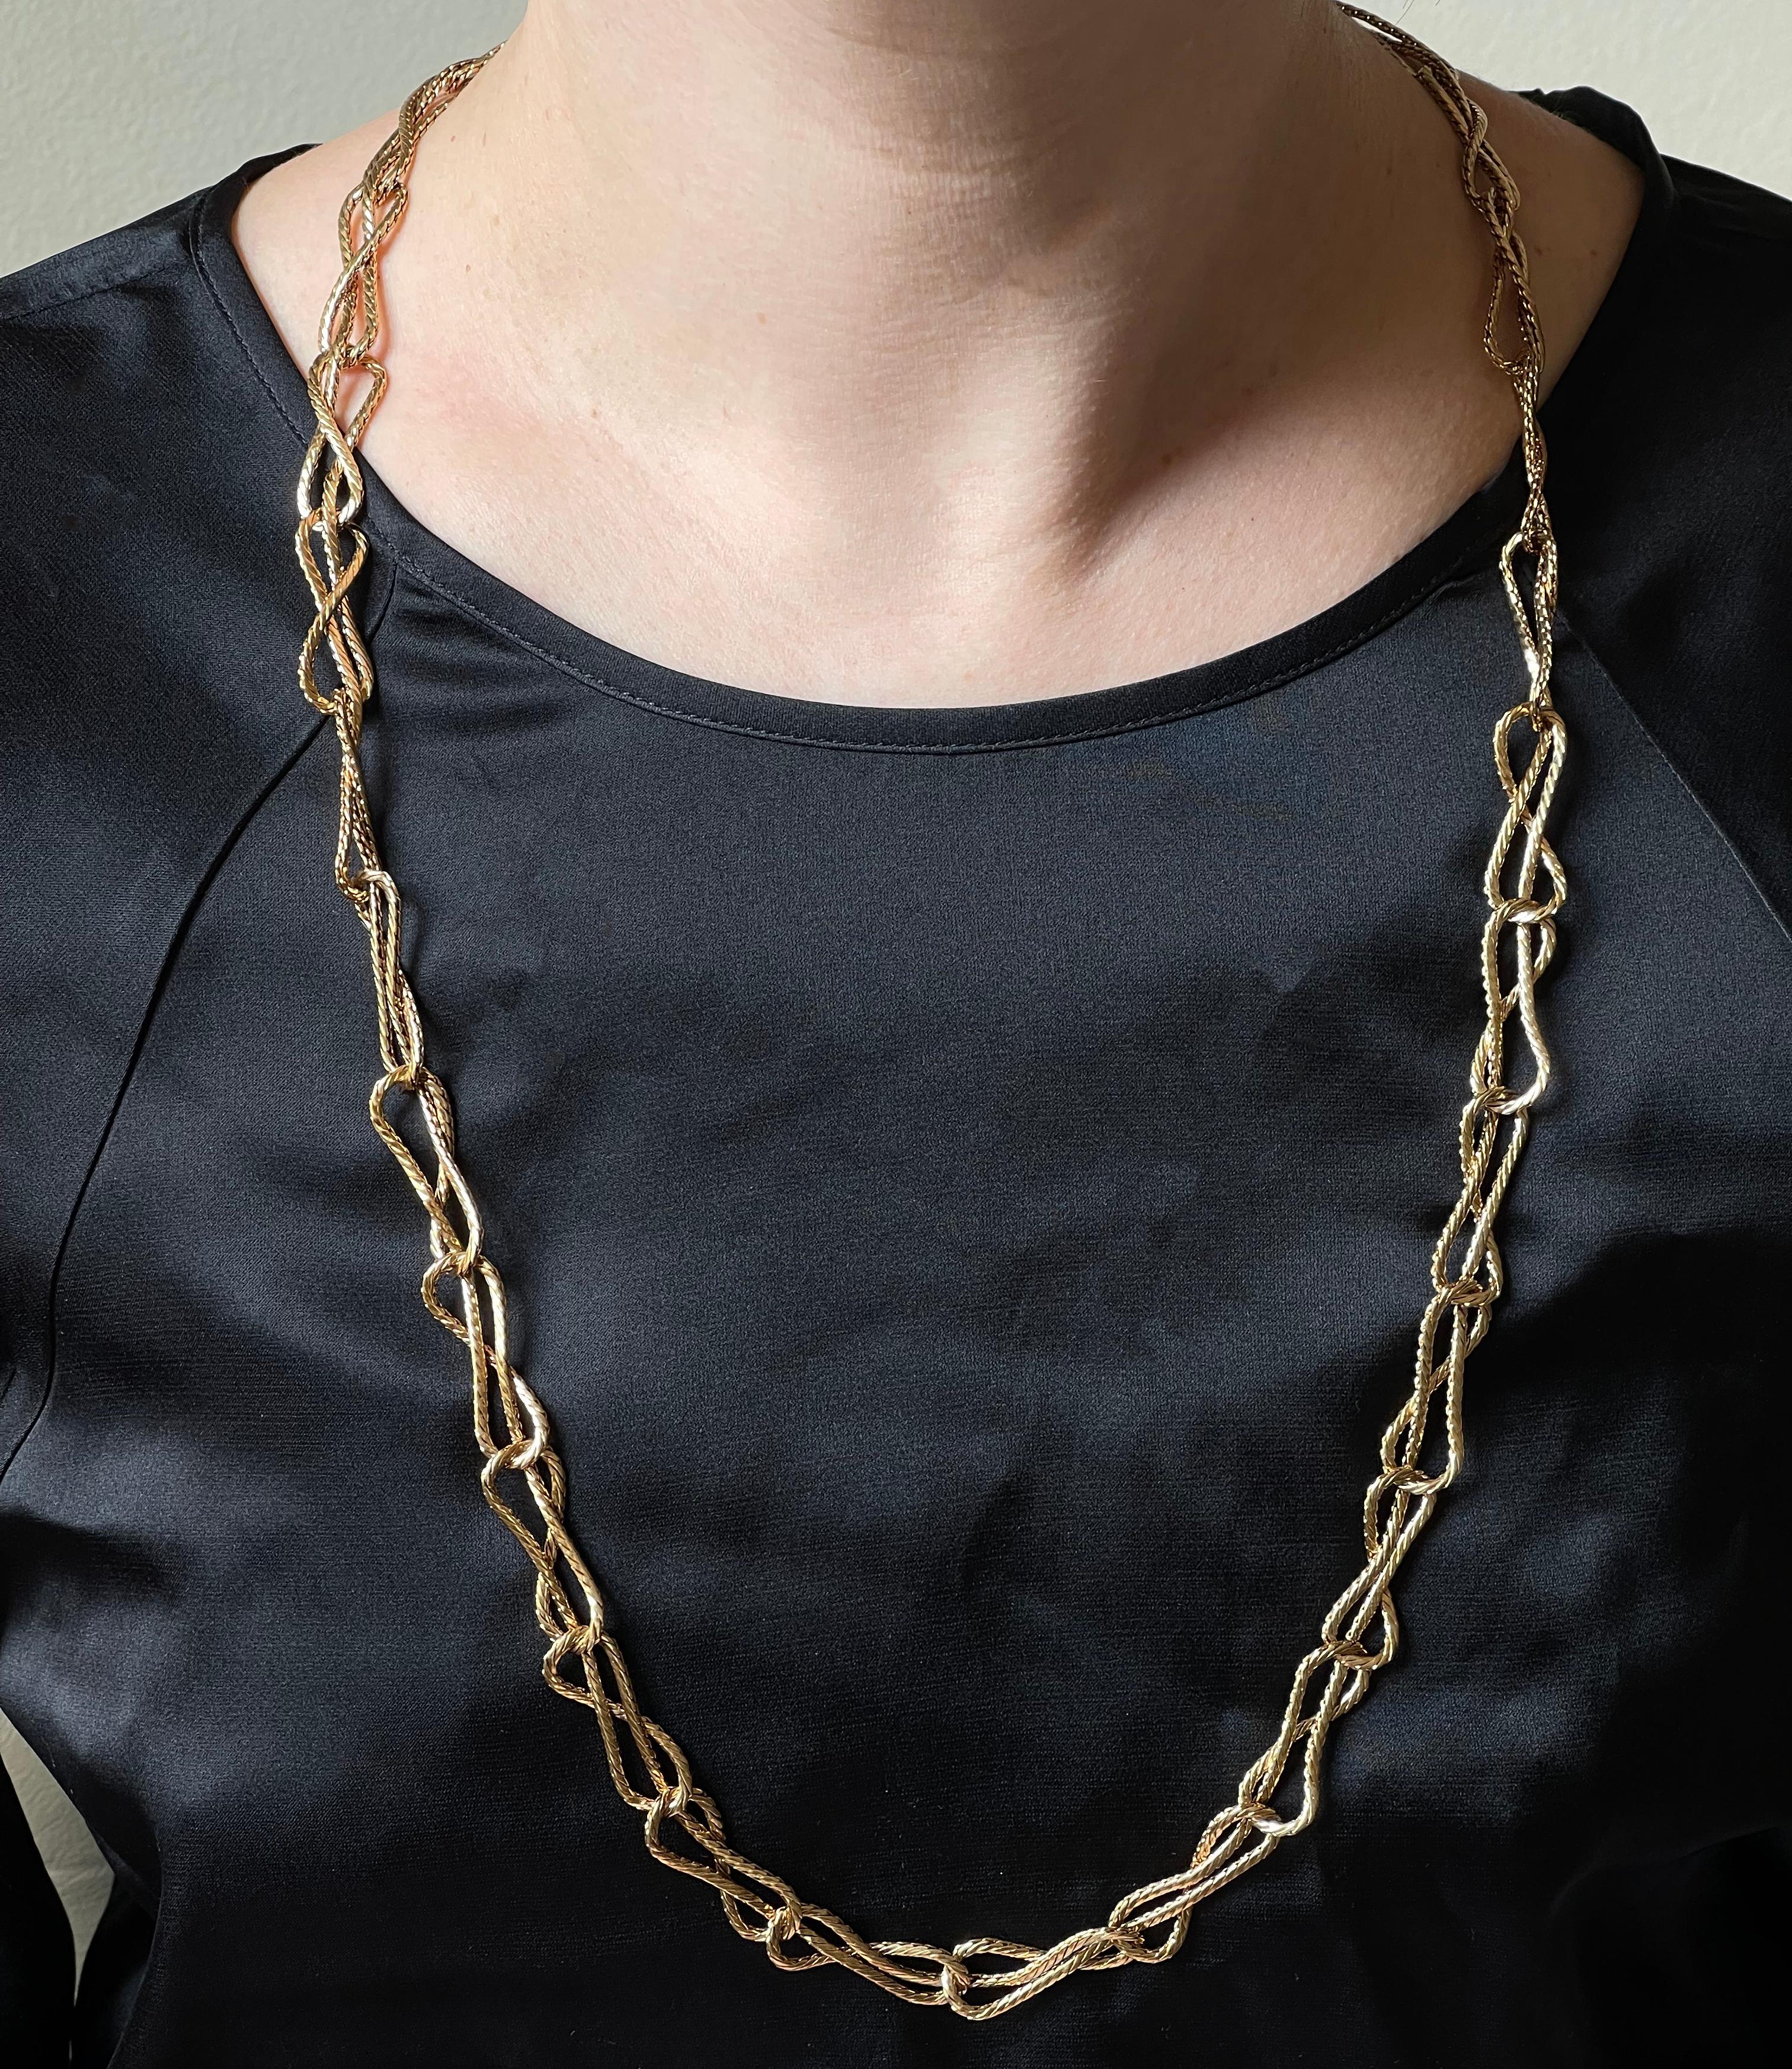 18k gold classic interlocked woven link necklace by one and only Mario Buccellati, the most coveted maker from the well known designer family.  The necklace is 33